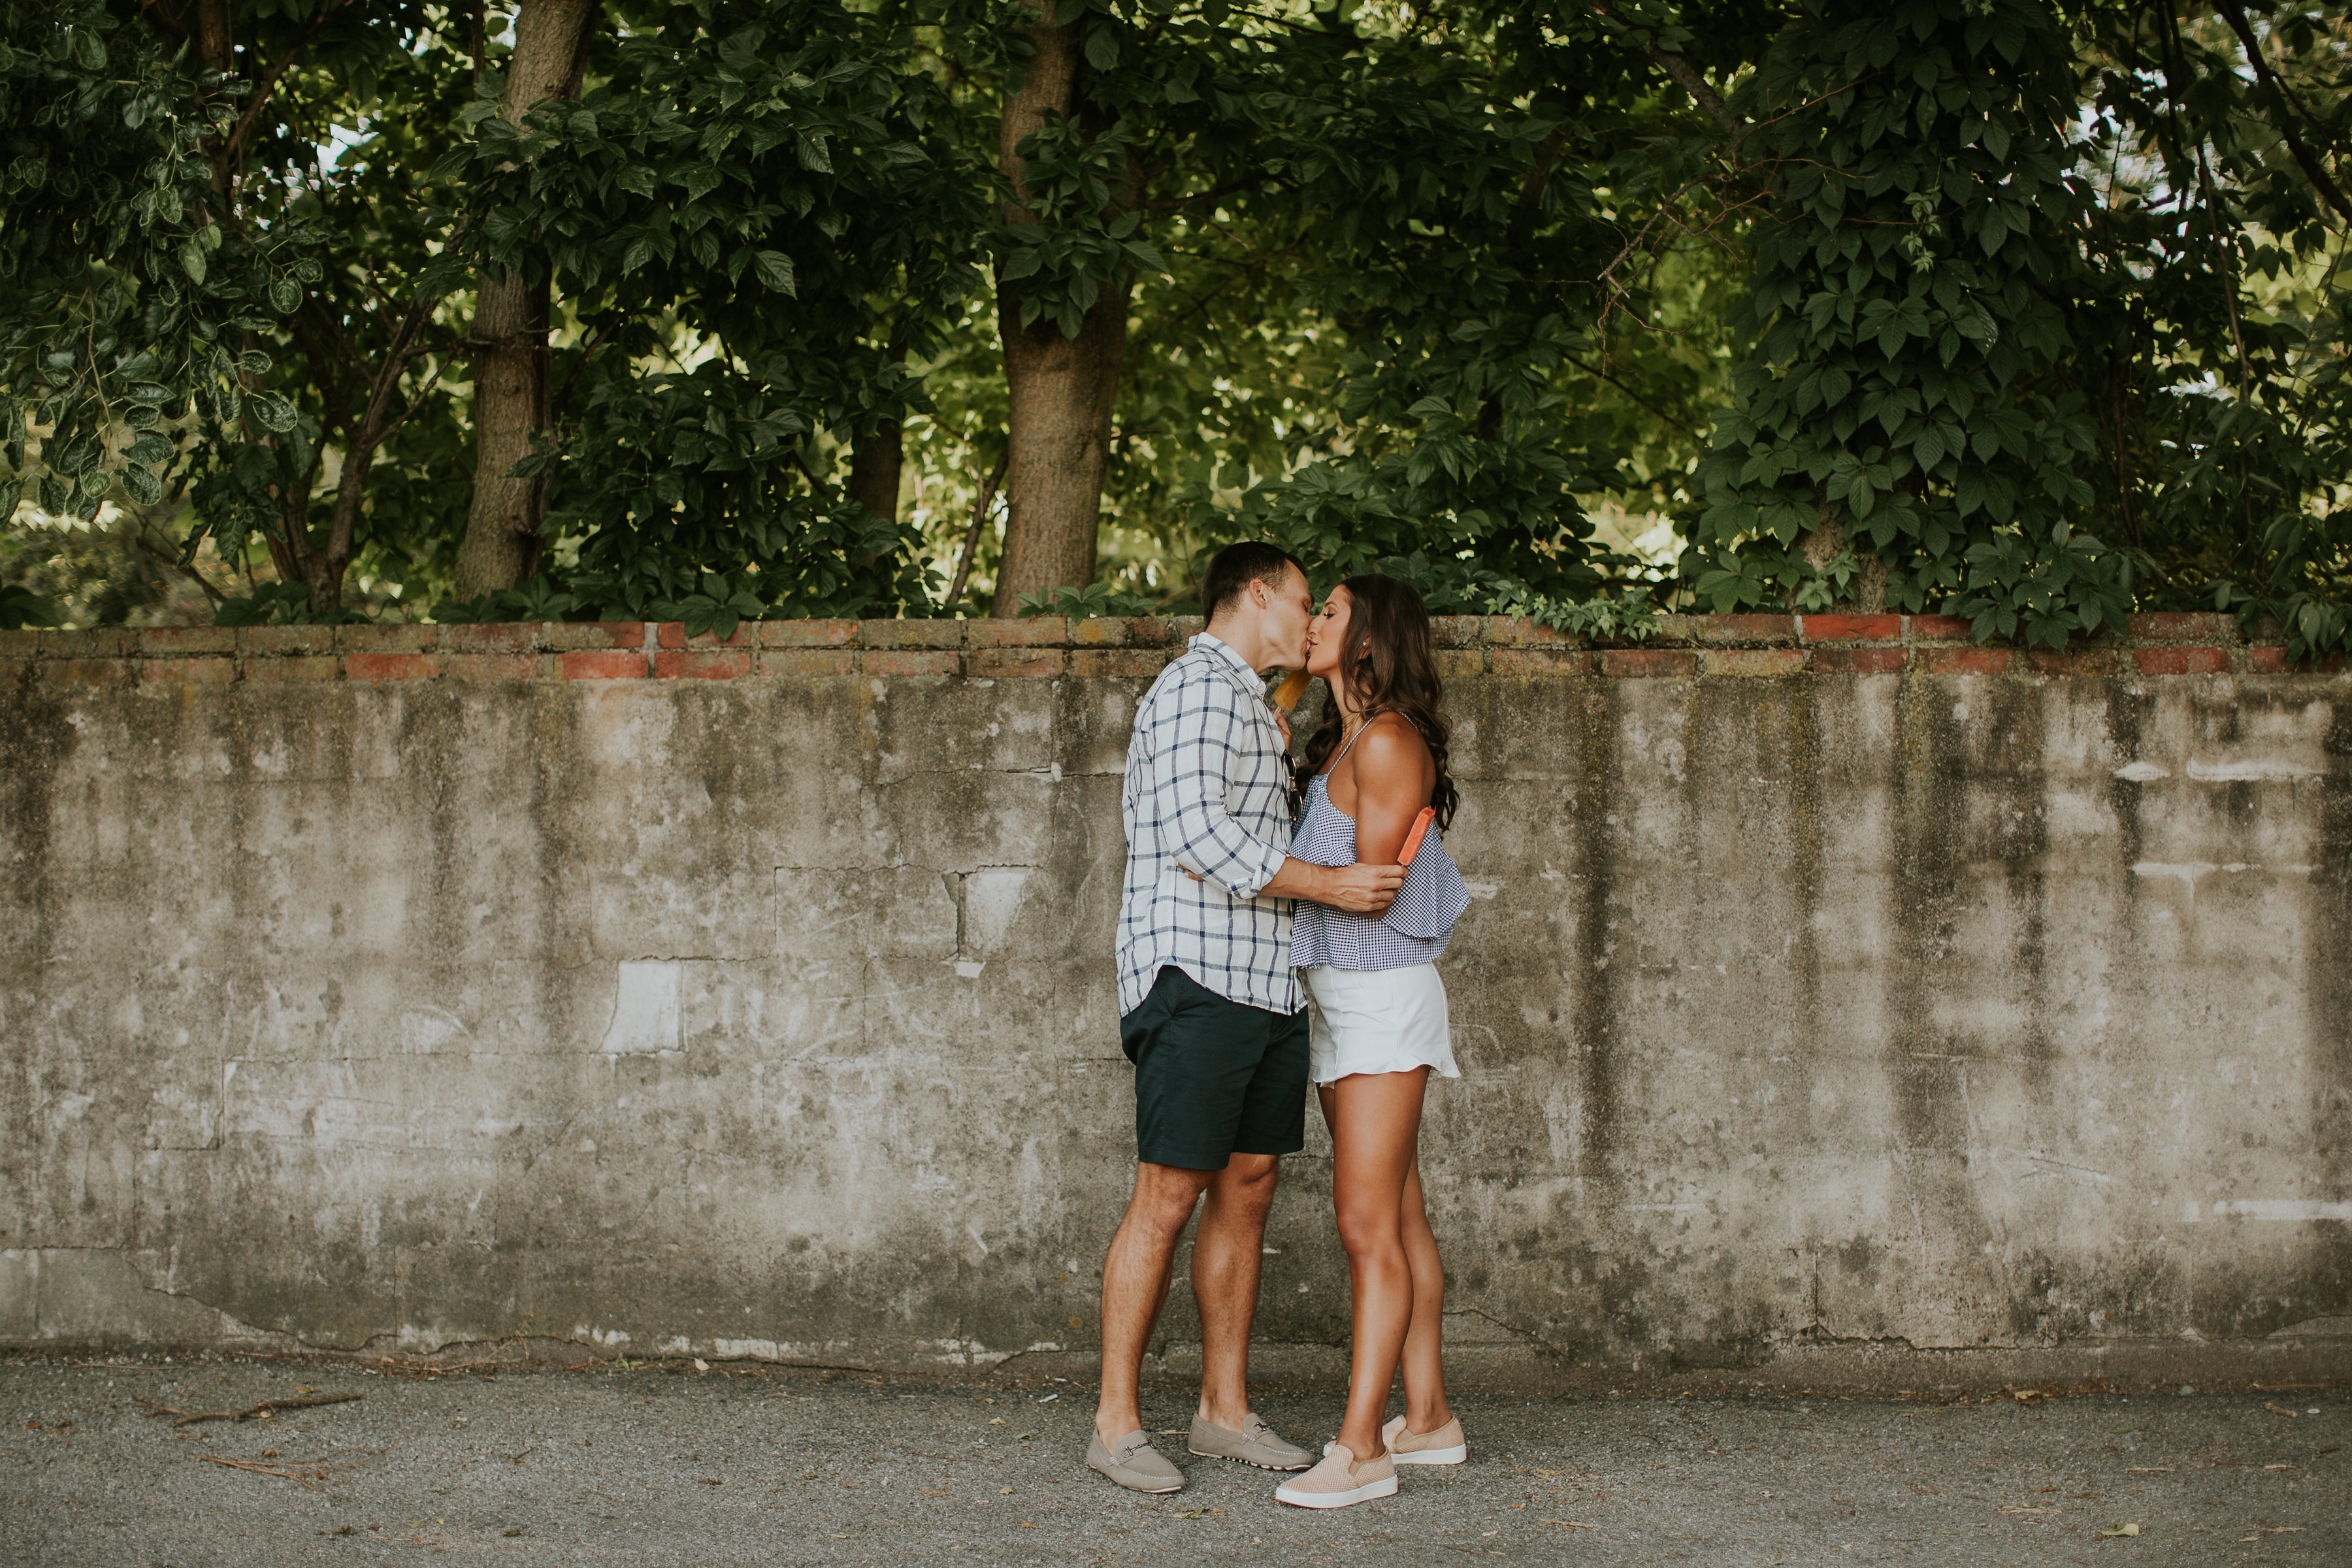 summer date night outfit, summer date nights, date night outfit, summer outfit for him, boyfriend style, a southern drawl fiance, gingham top, gingham style, ruffle shorts, casual sneakers, trendy slip ons, summer date night ideas, a southern drawl fiance, jordan white a southern drawl // grace wainwright 